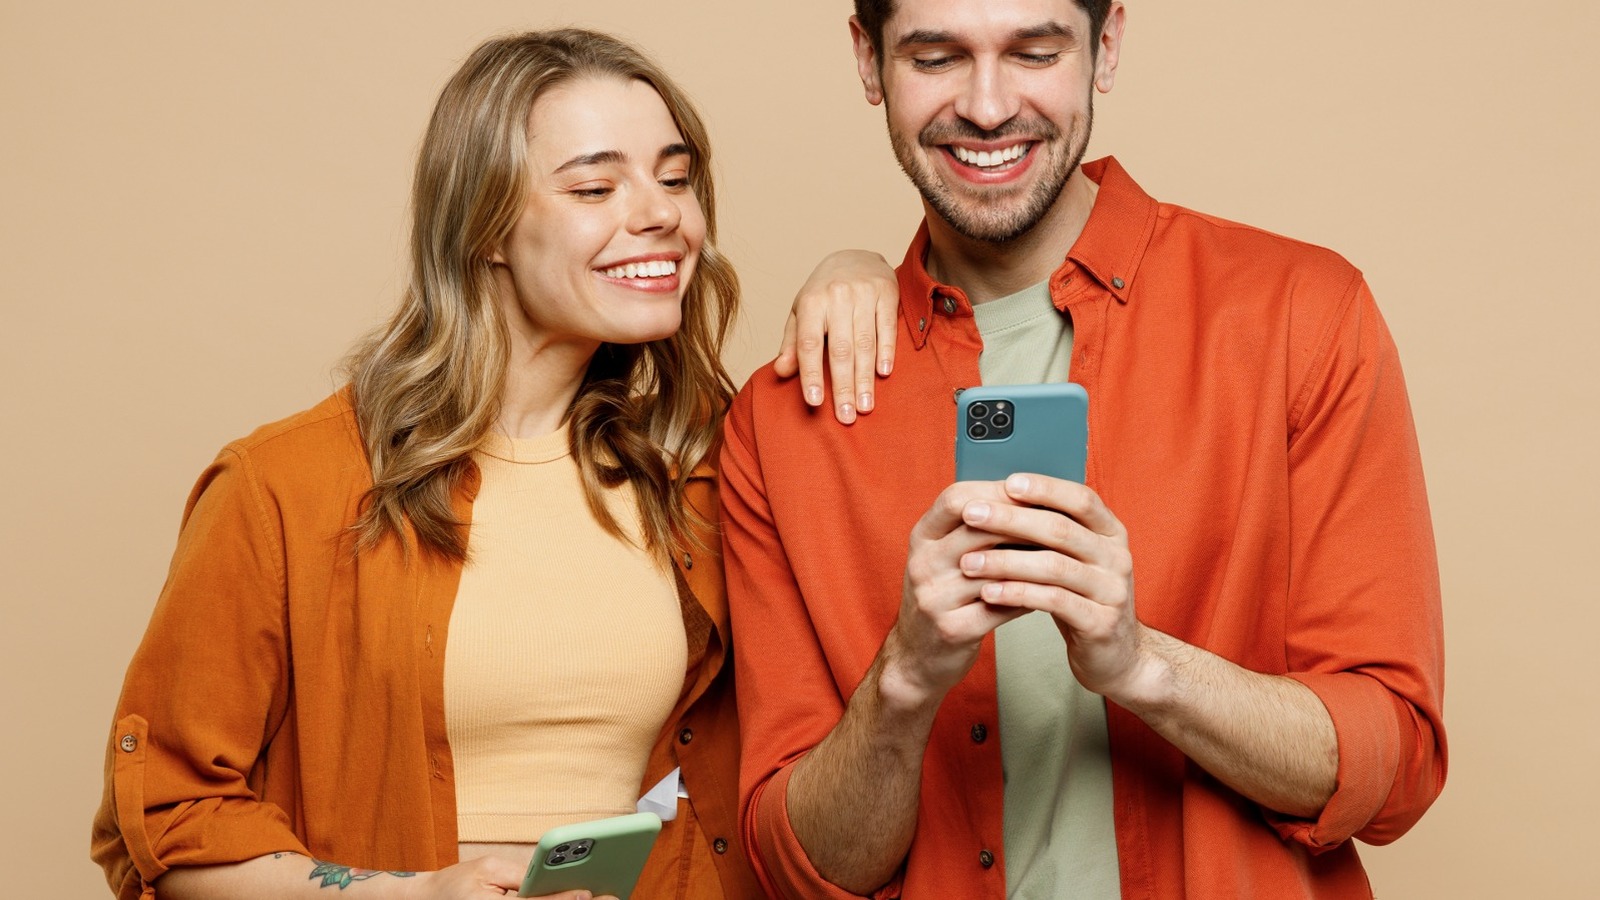 4 iPhone Apps You Can Use To Stay Connected With Your Friends